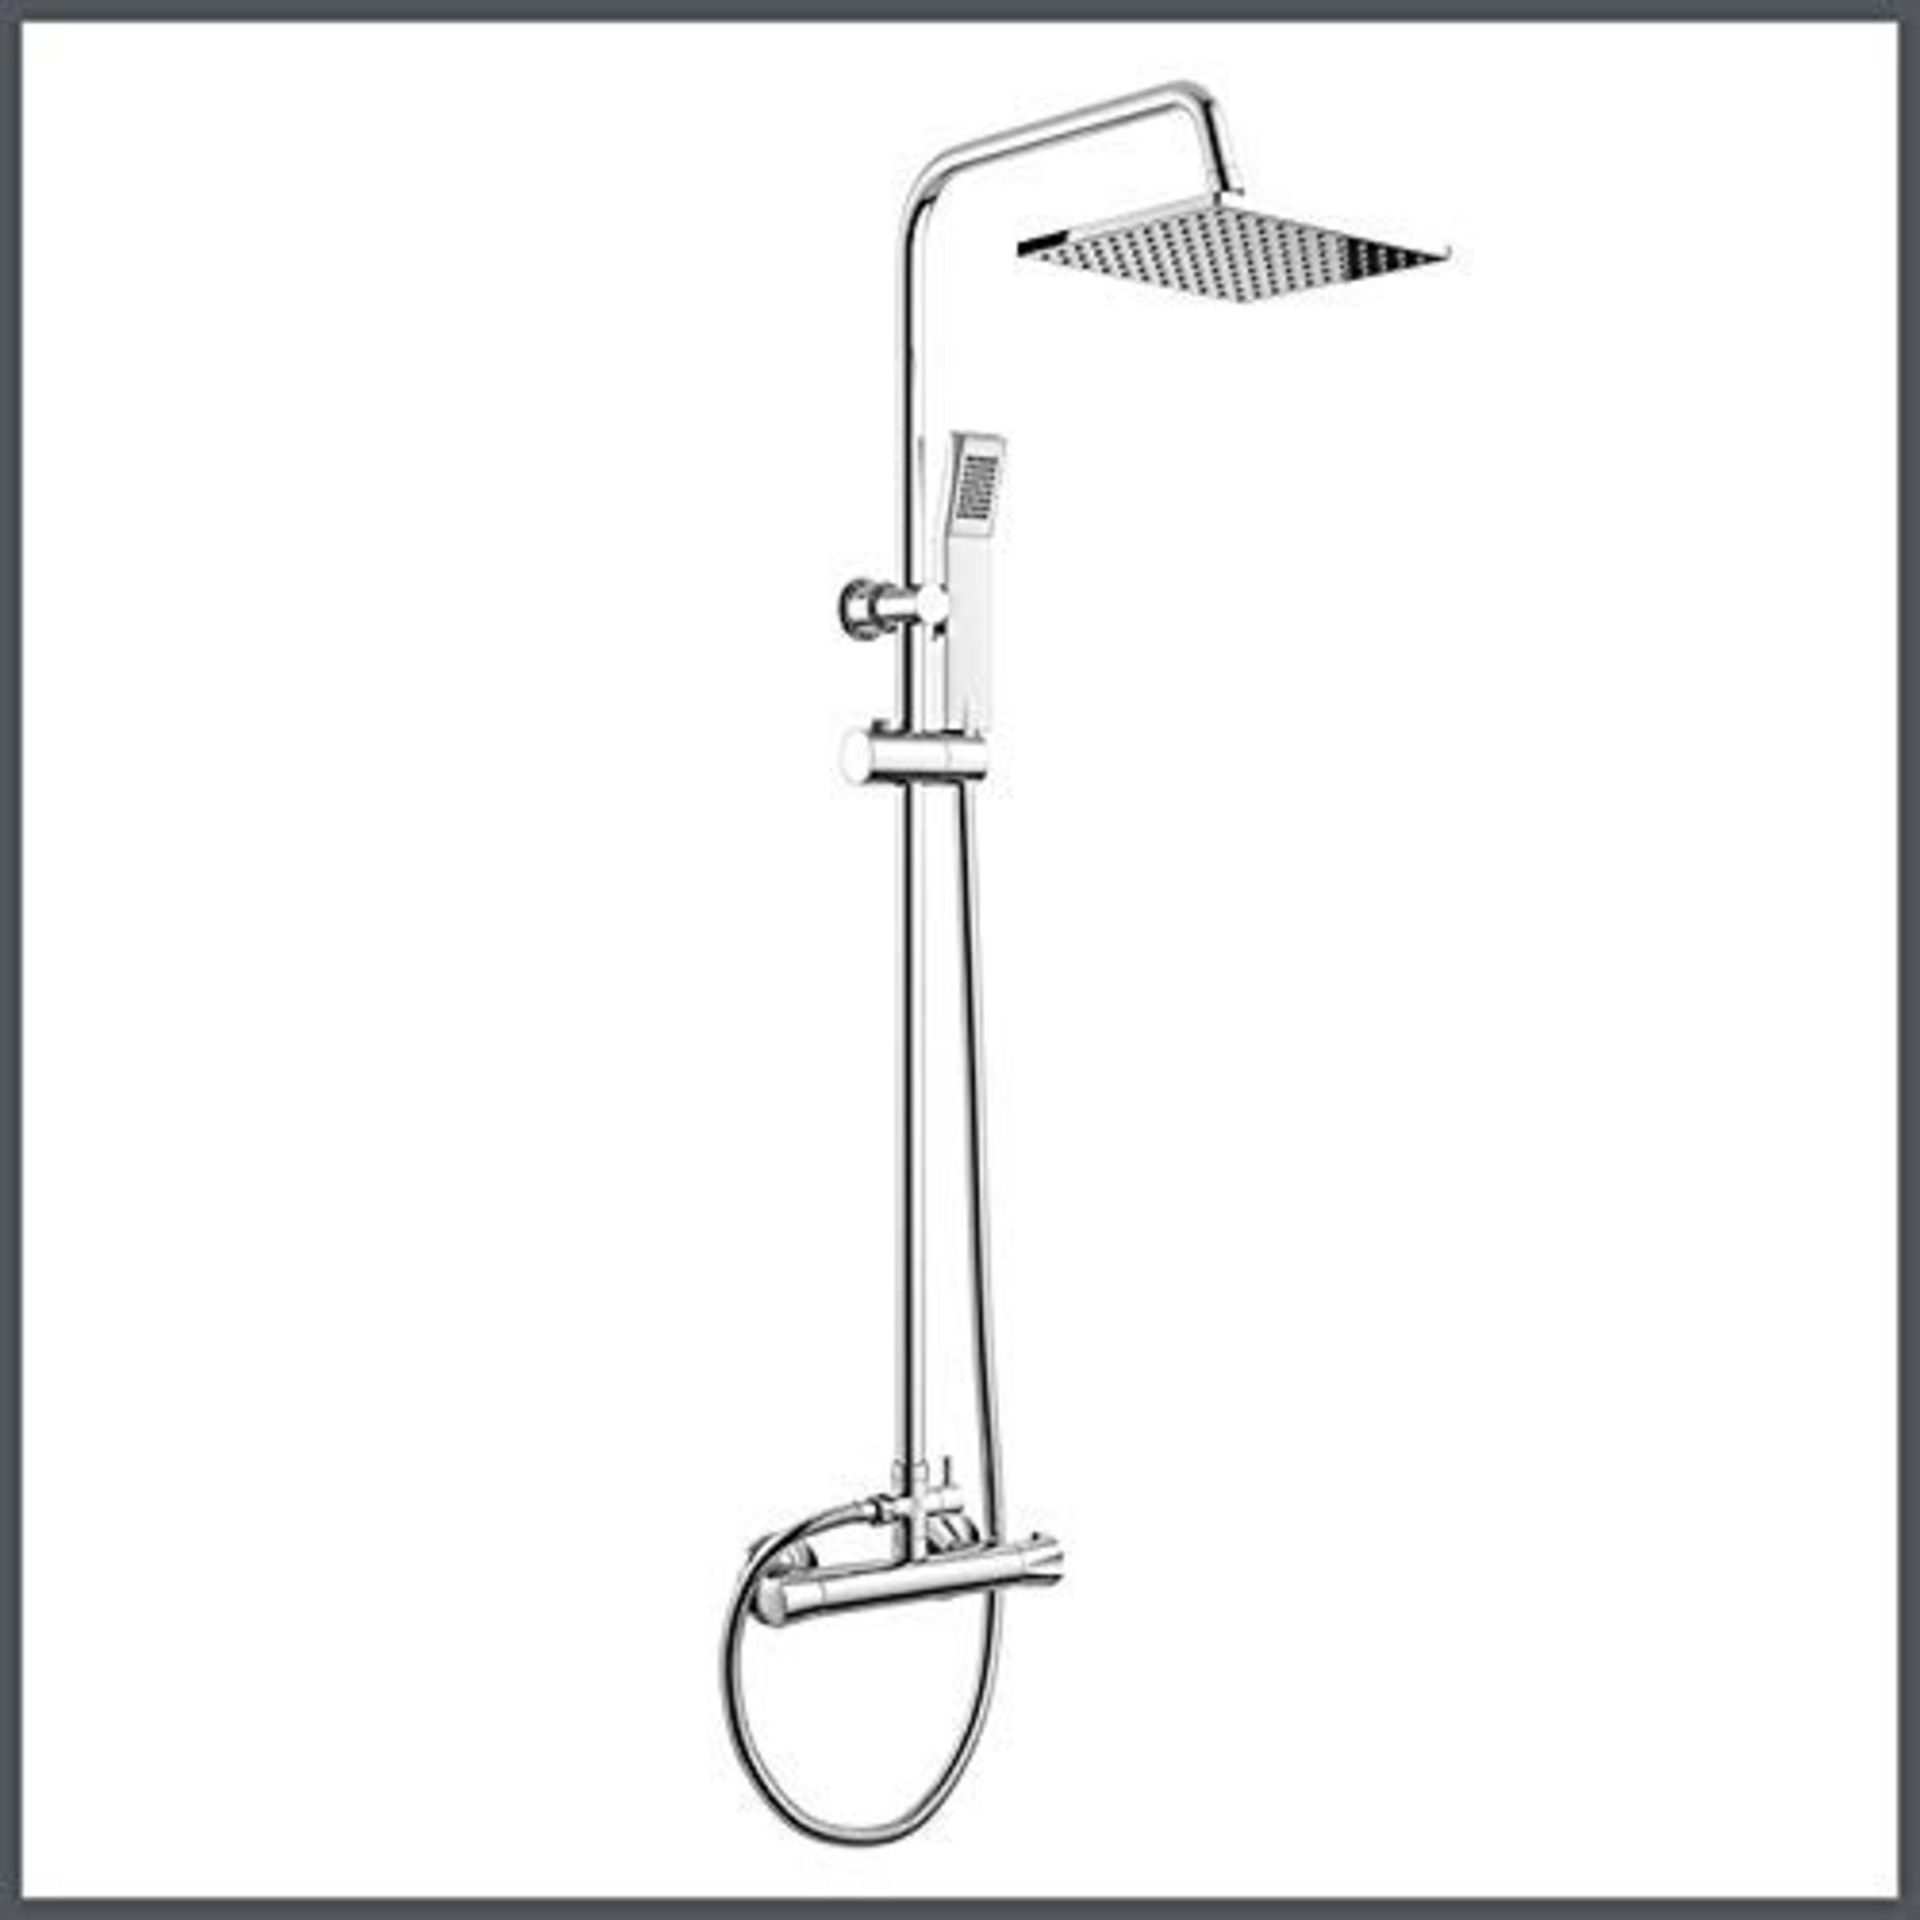 (QP201) Exposed Thermostatic 2-Way Bar Mixer Shower Set Chrome Valve 200mm Square Head +  (QP201) - Image 2 of 2